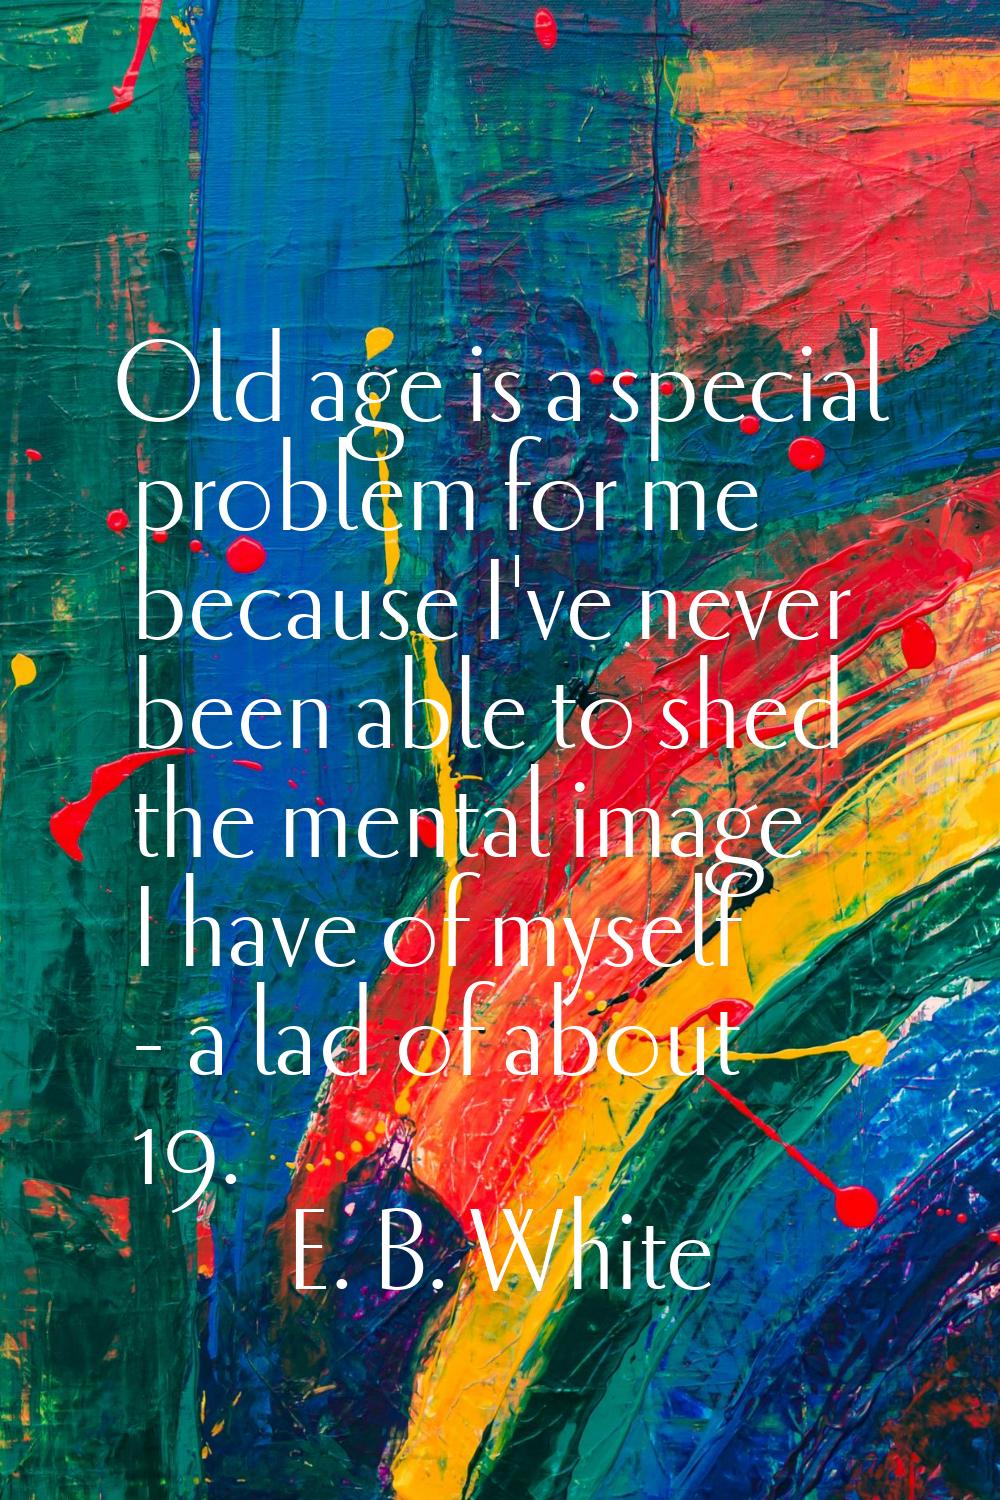 Old age is a special problem for me because I've never been able to shed the mental image I have of